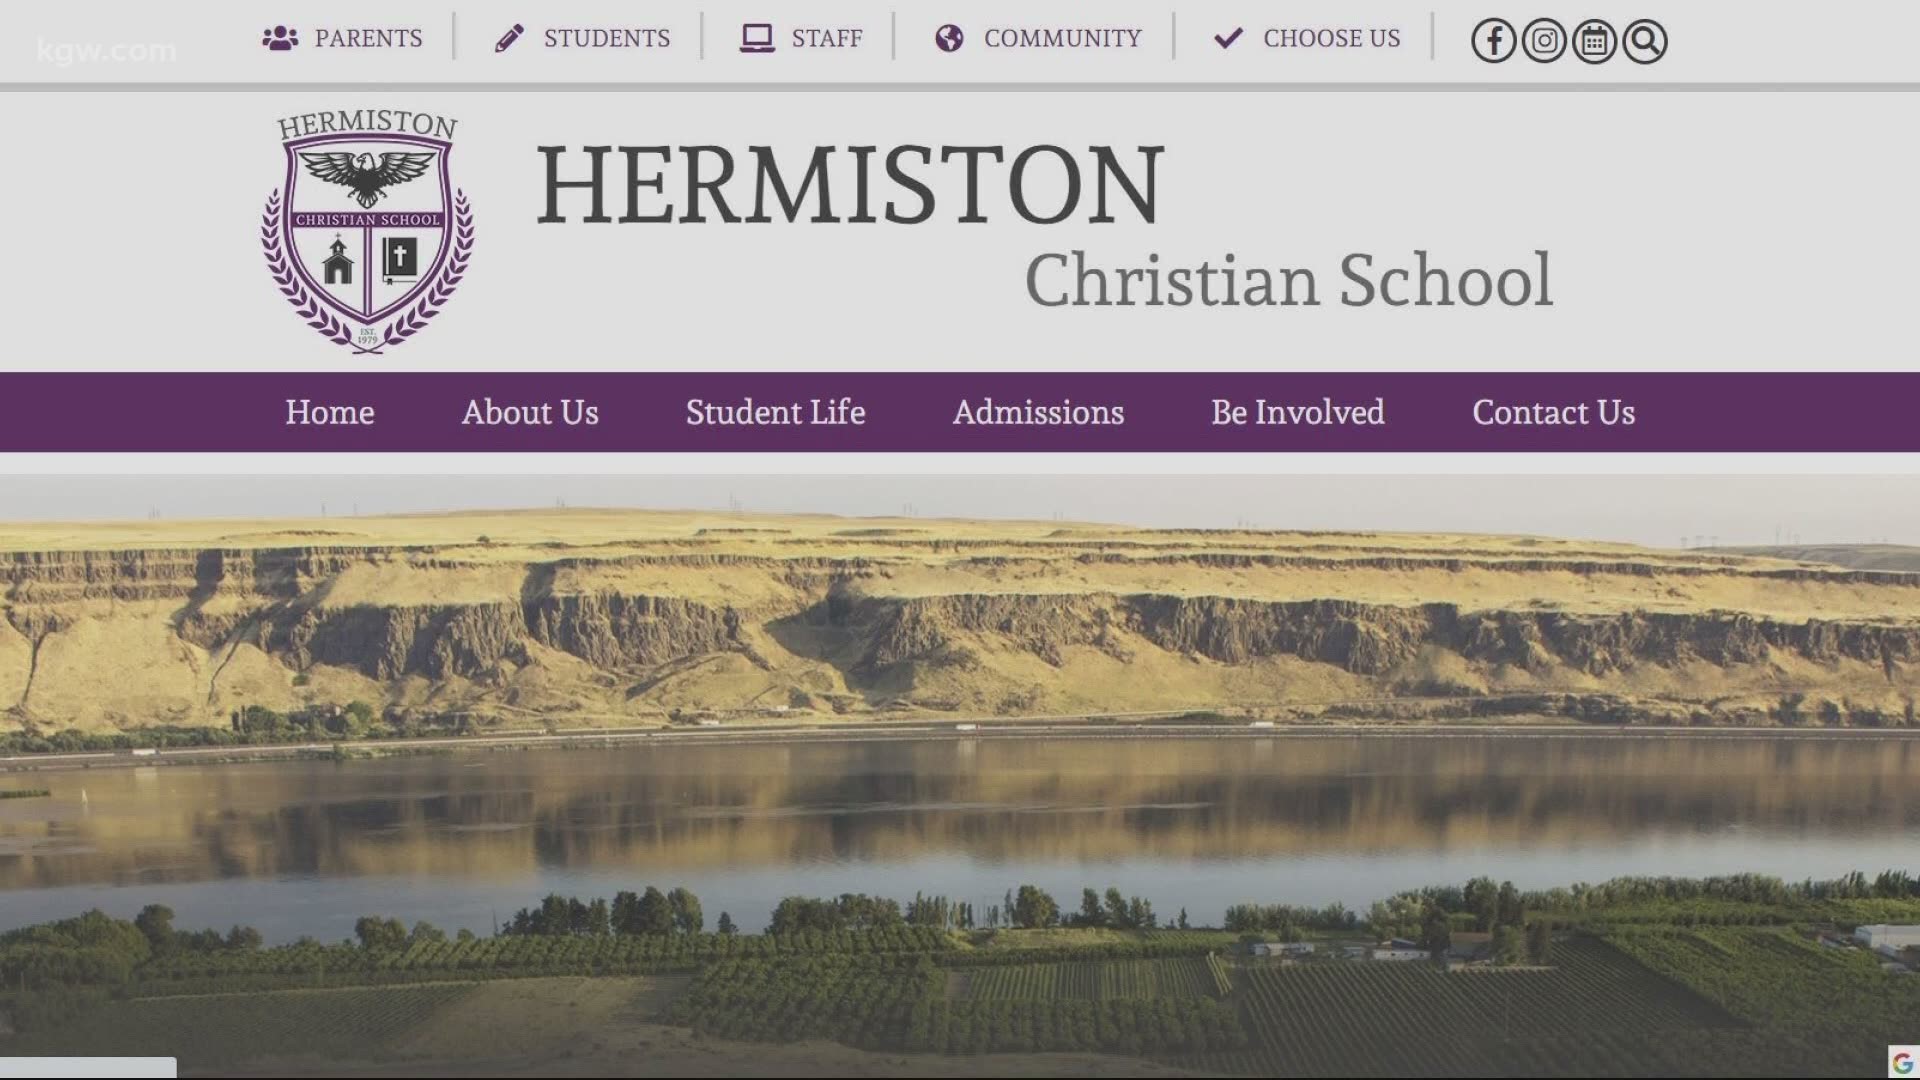 A private school in Eastern Oregon has filed a lawsuit against the state of Oregon for not allowing it to offer in-person learning. Christine Pitawanich reports.